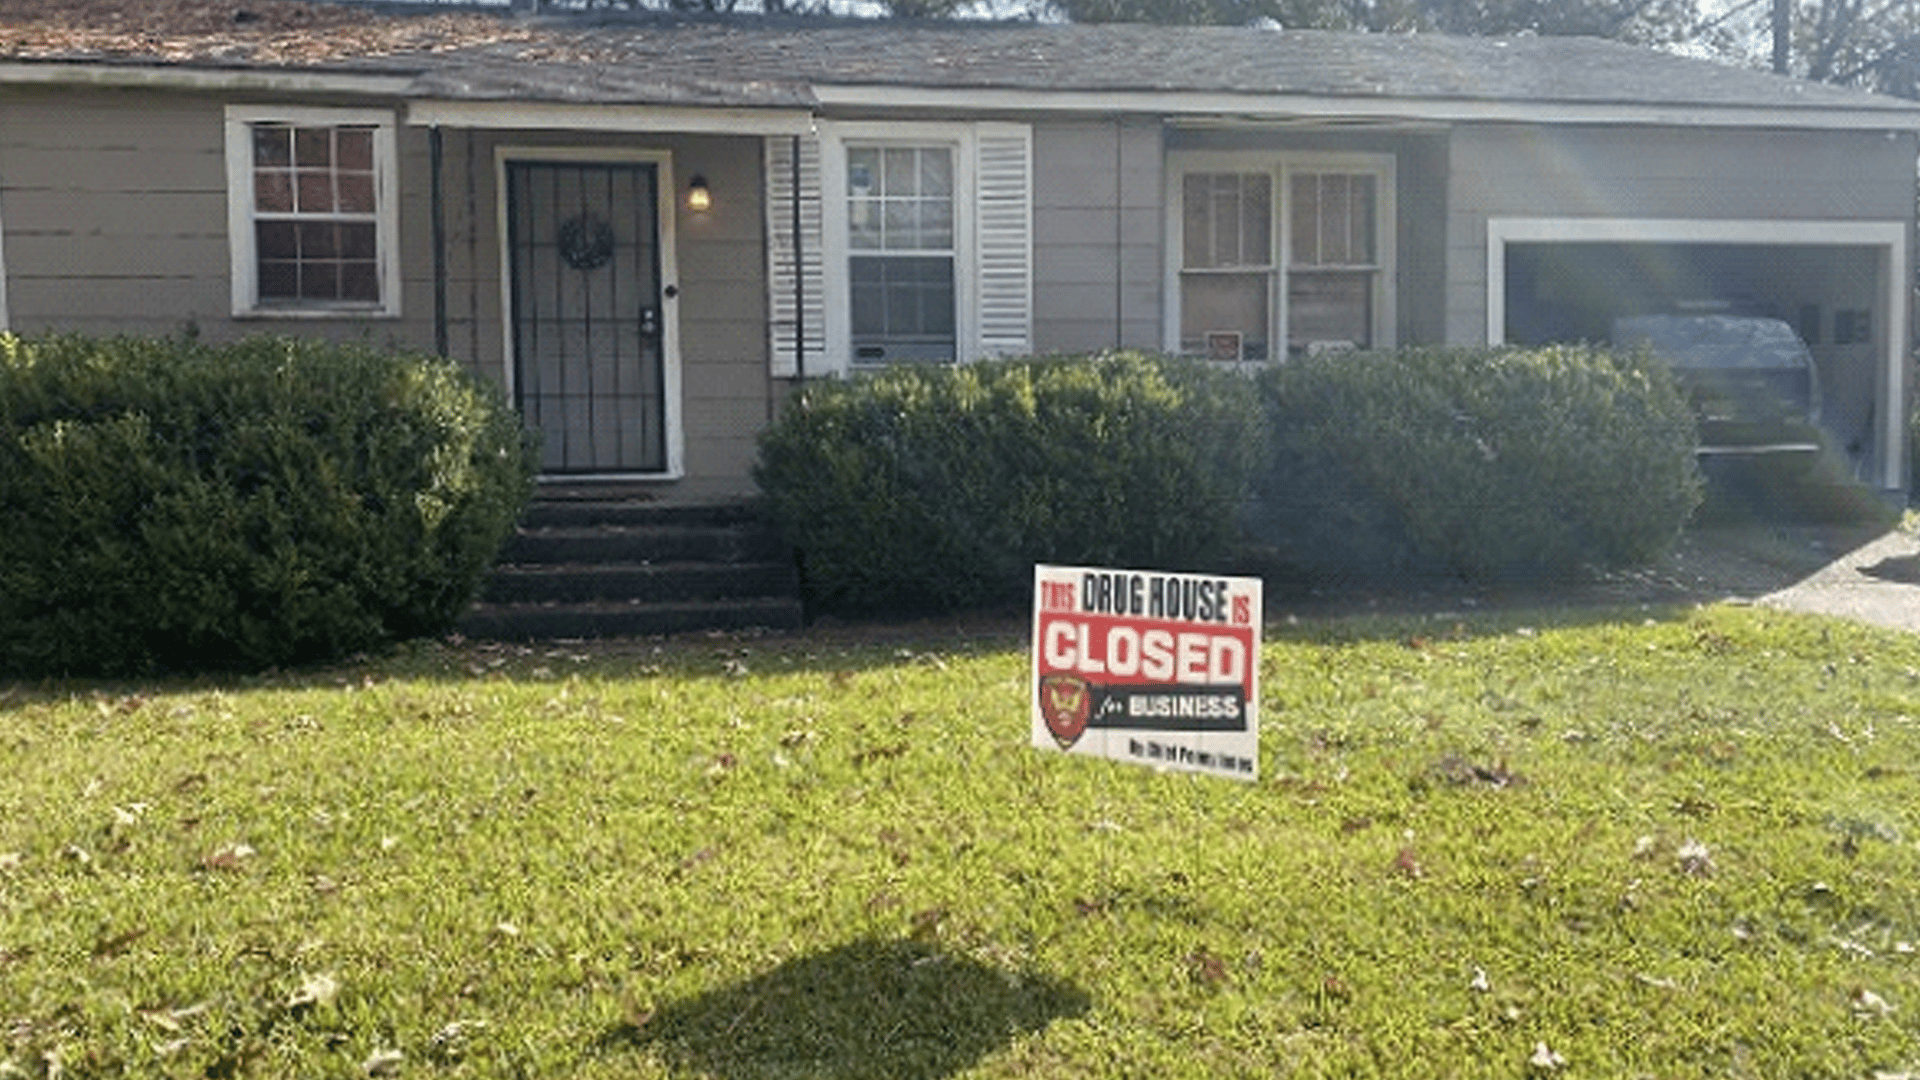 drug buys house closed